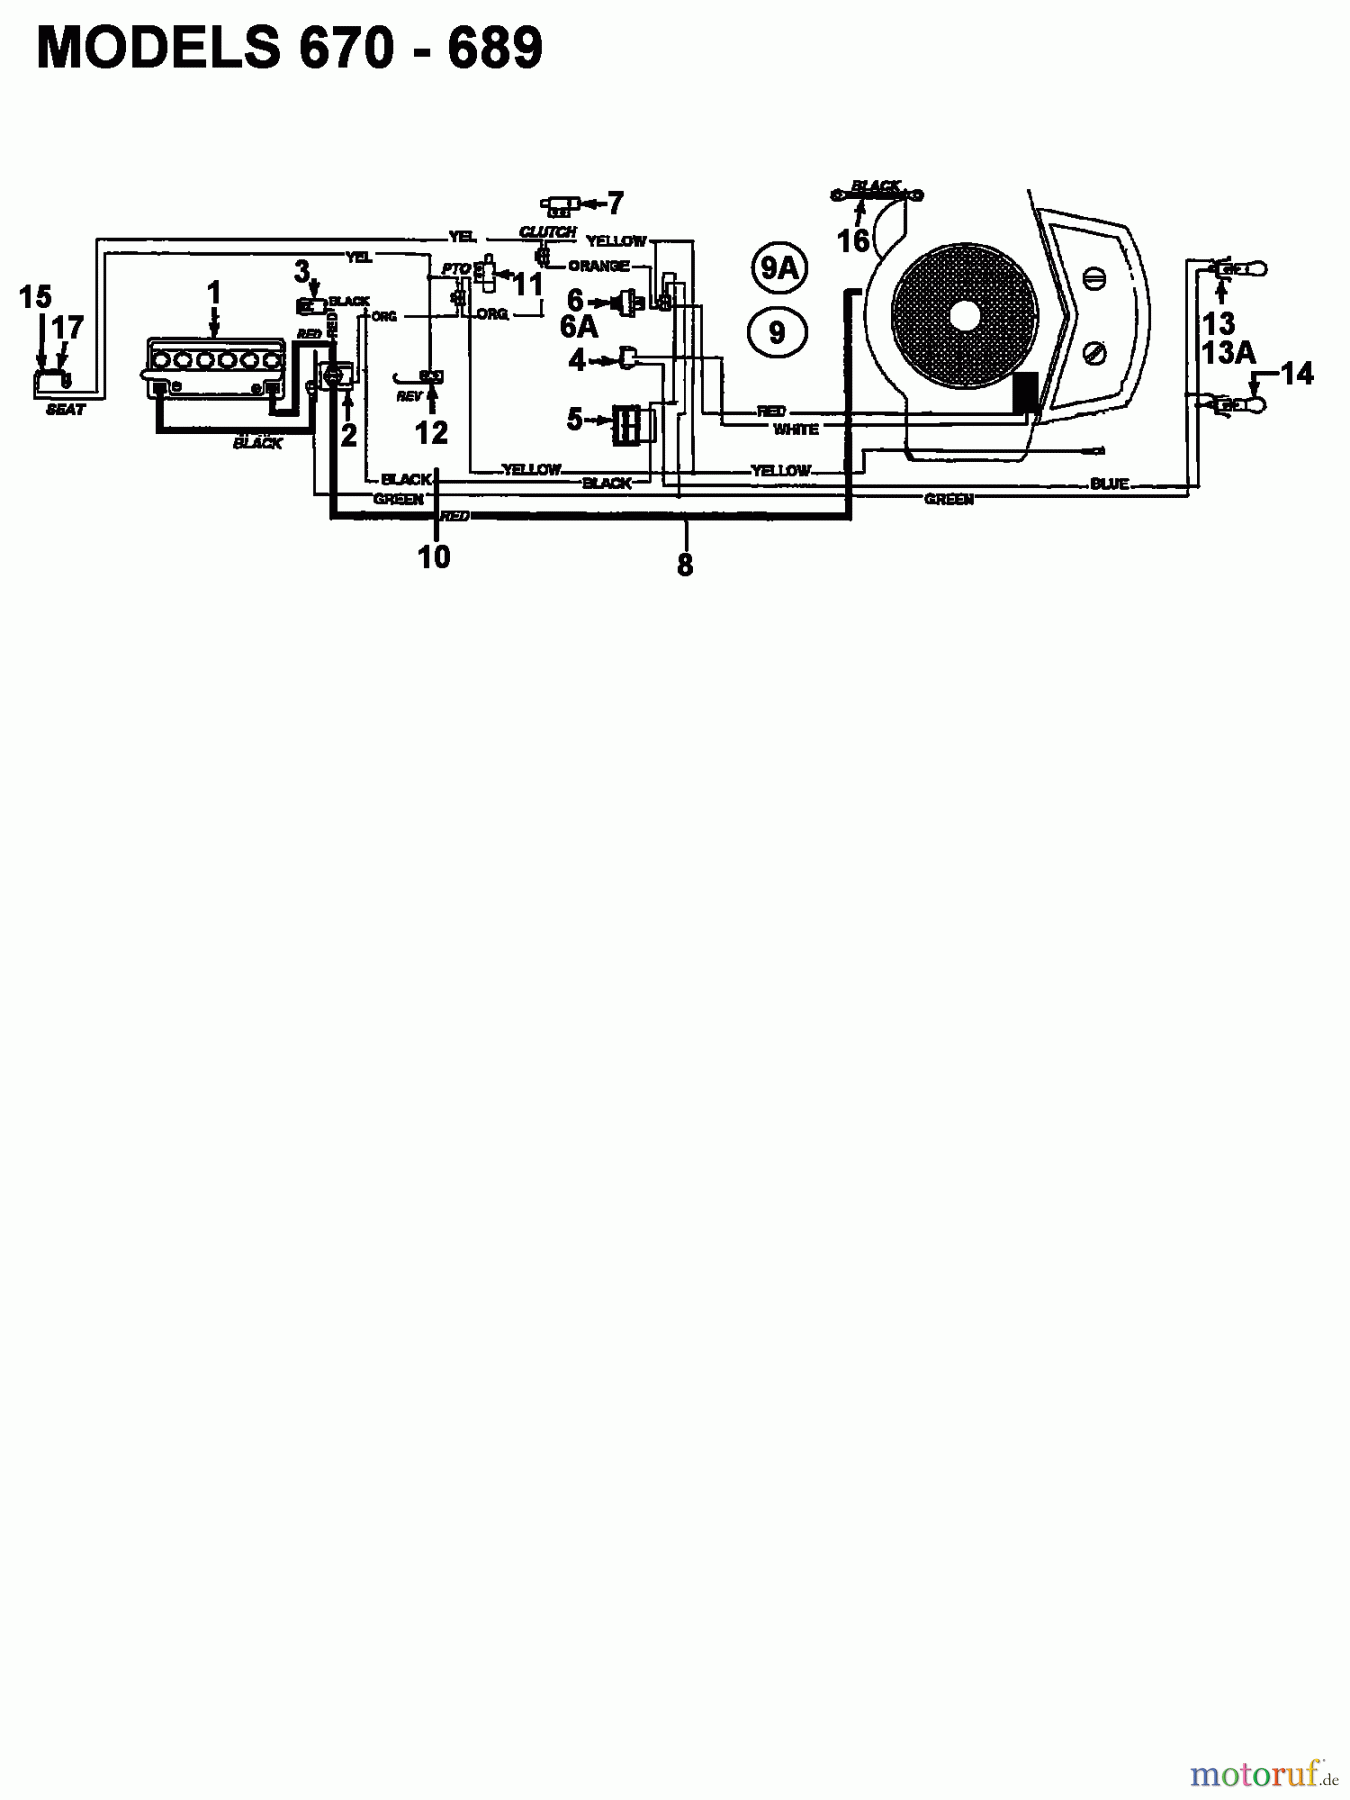  Columbia Lawn tractors 112/960 N 132-650F626  (1992) Wiring diagram twin cylinder